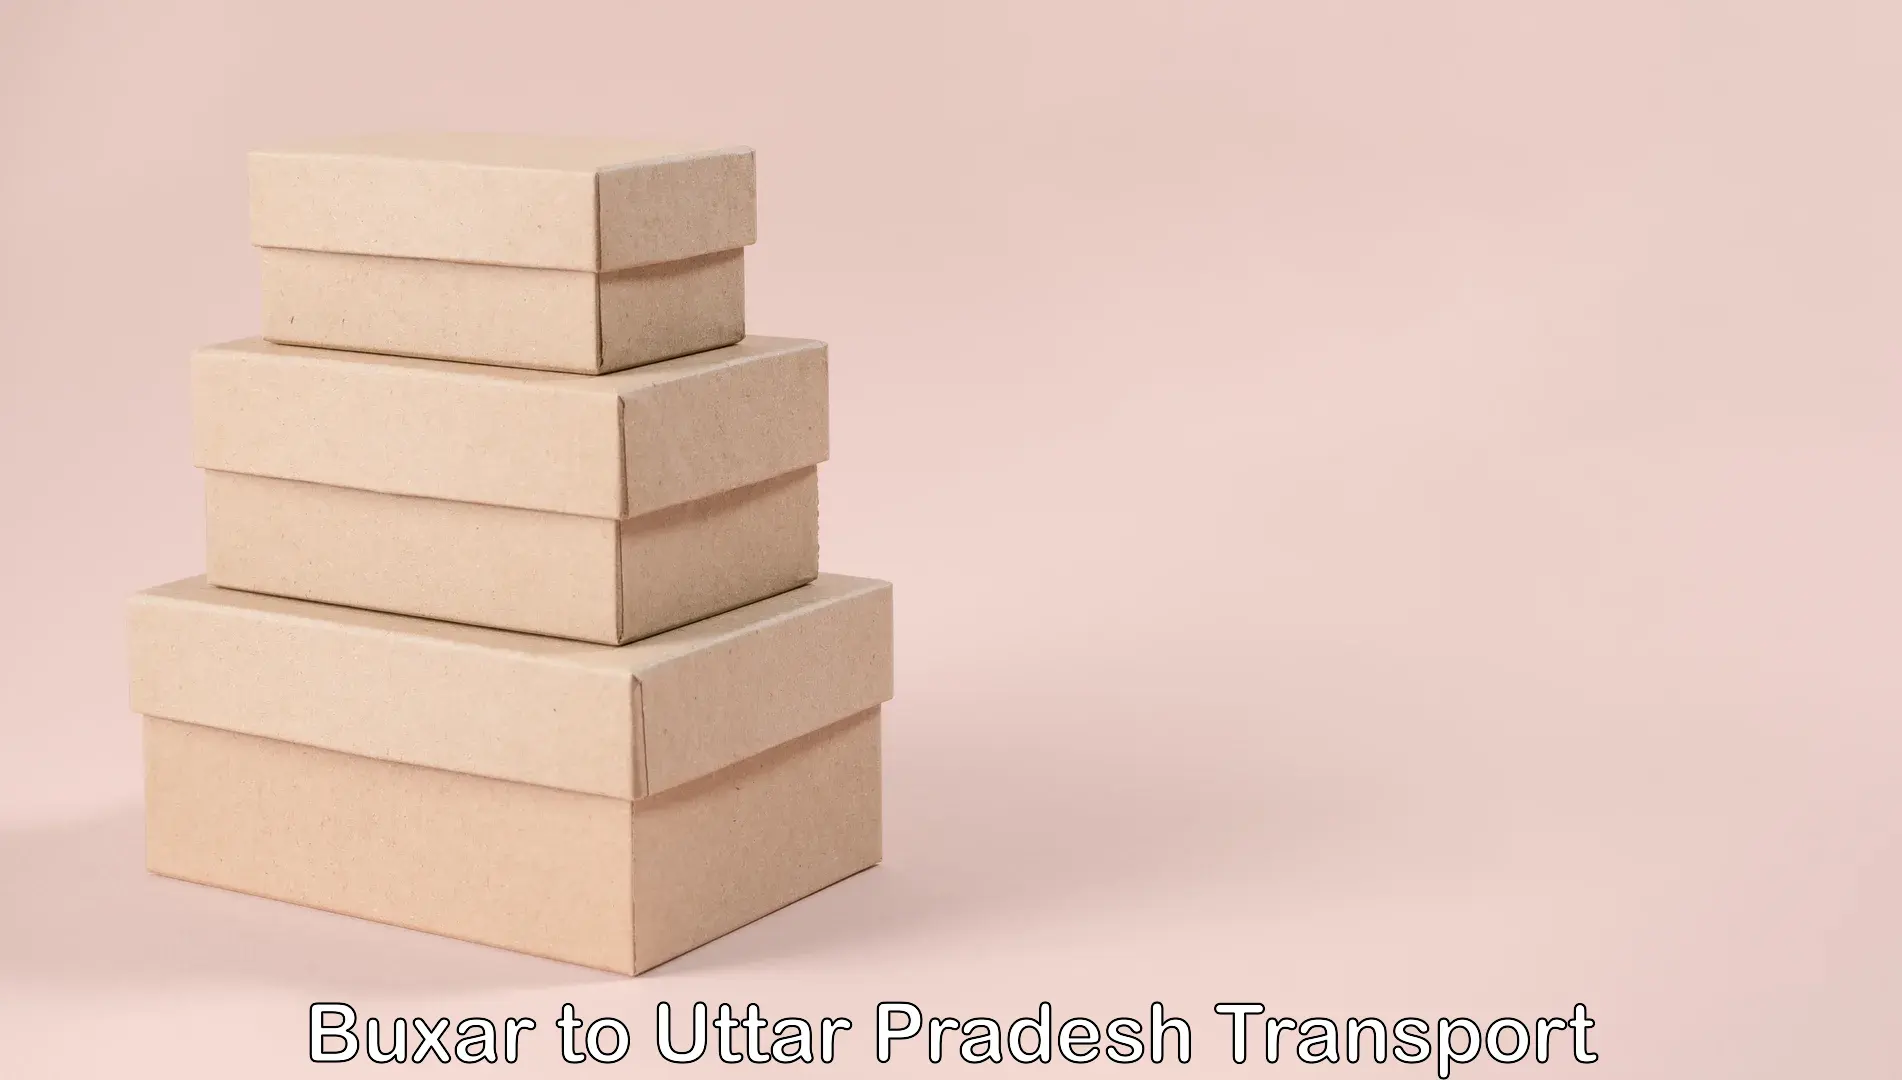 Online transport service Buxar to Lucknow